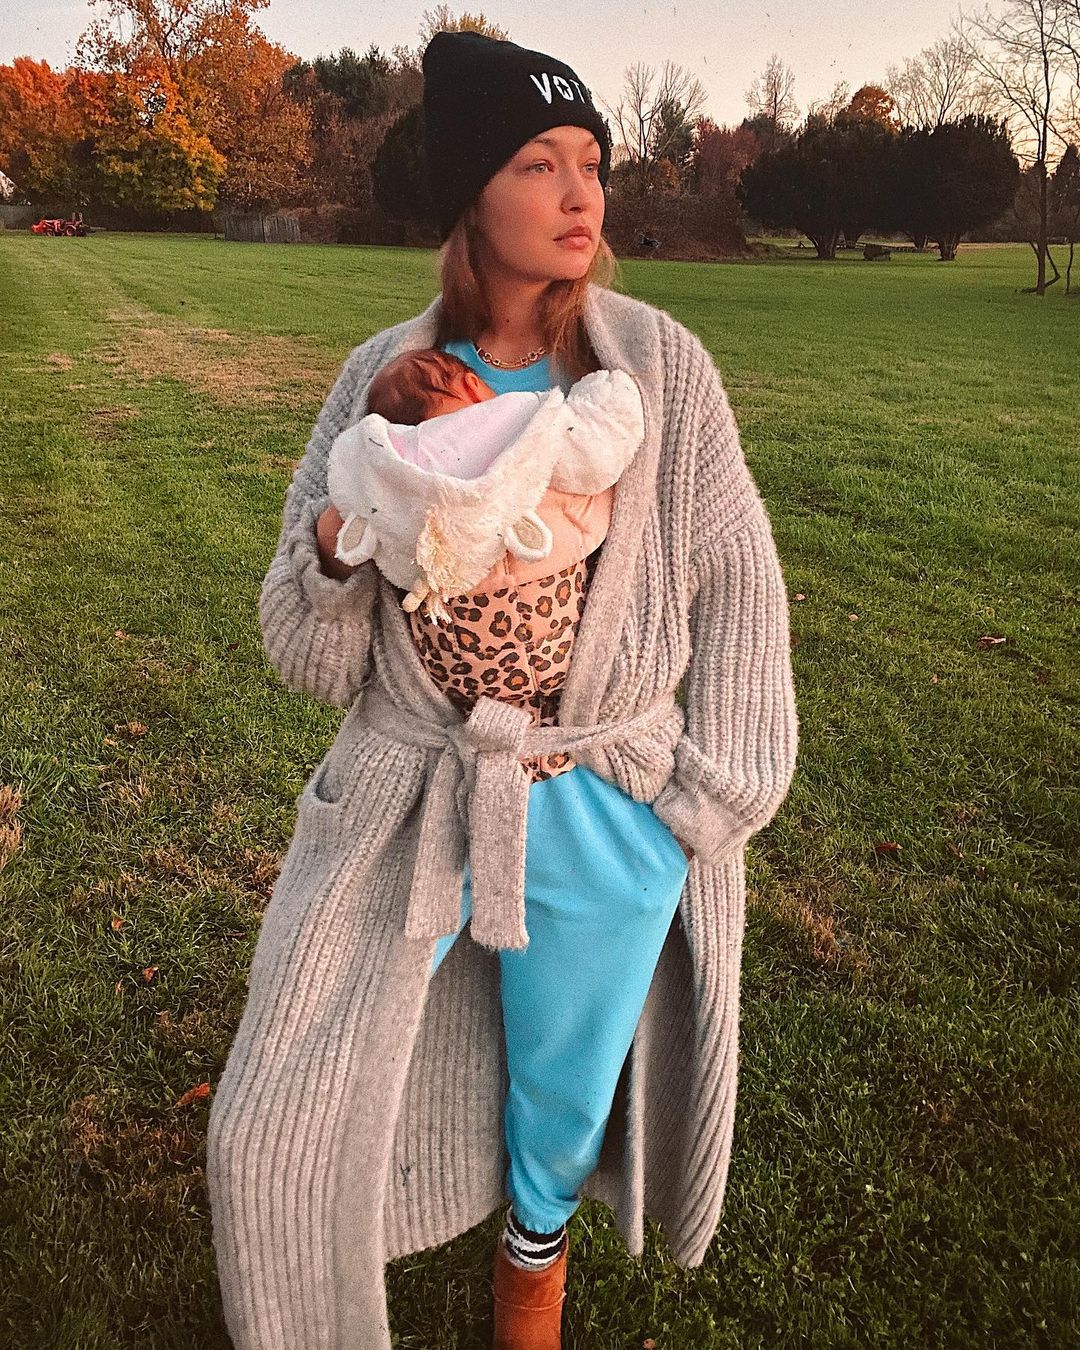 Gigi Hadid looks absolutely gorgeous in this blue two-piece outfit and overall sweater, while holding her bundle of joy to her chest.